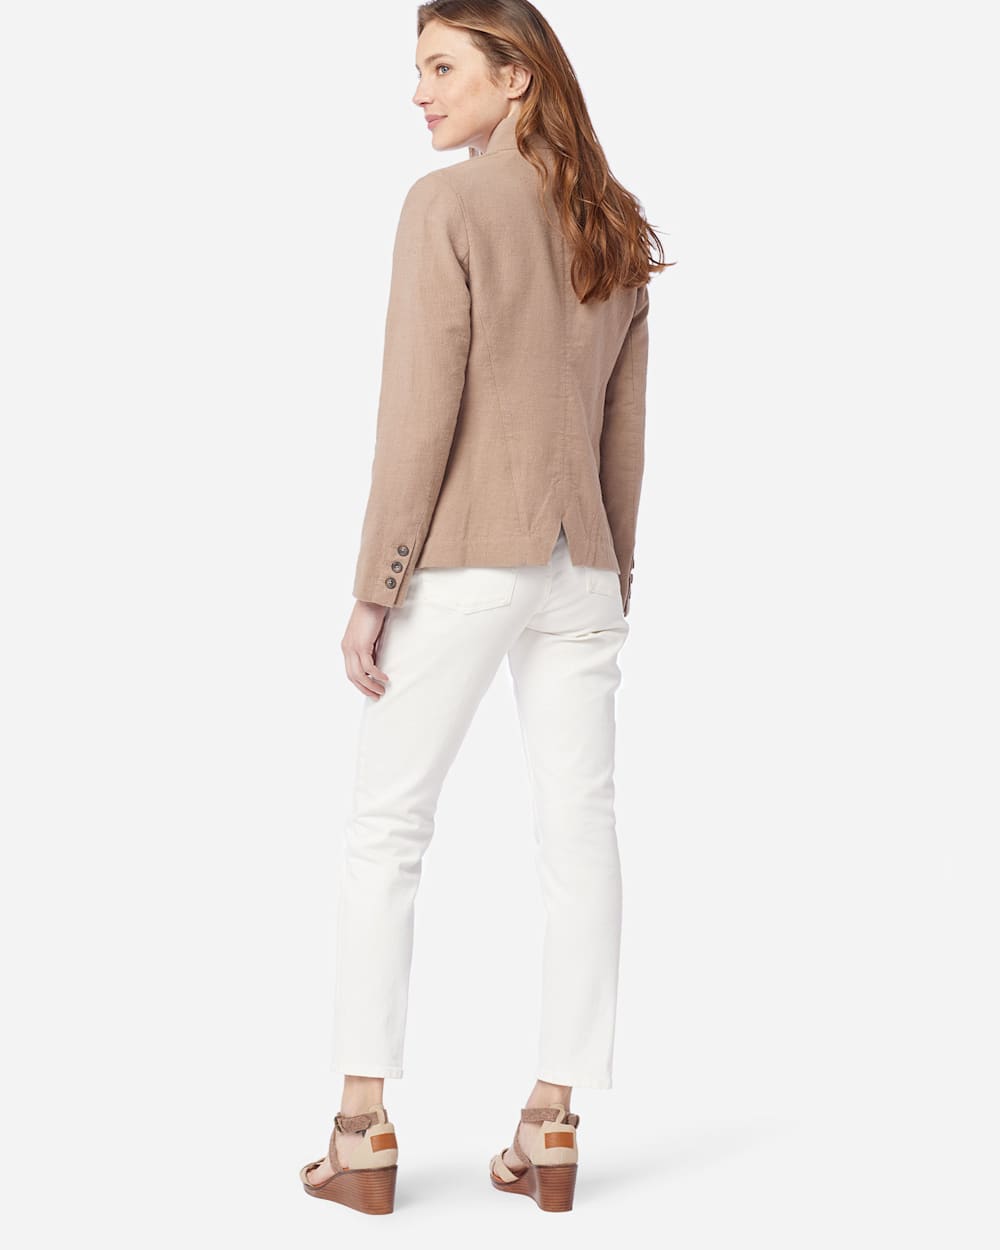 ALTERNATE VIEW OF WOMEN'S COLLARLESS ONE BUTTON BLAZER IN TAUPE image number 3